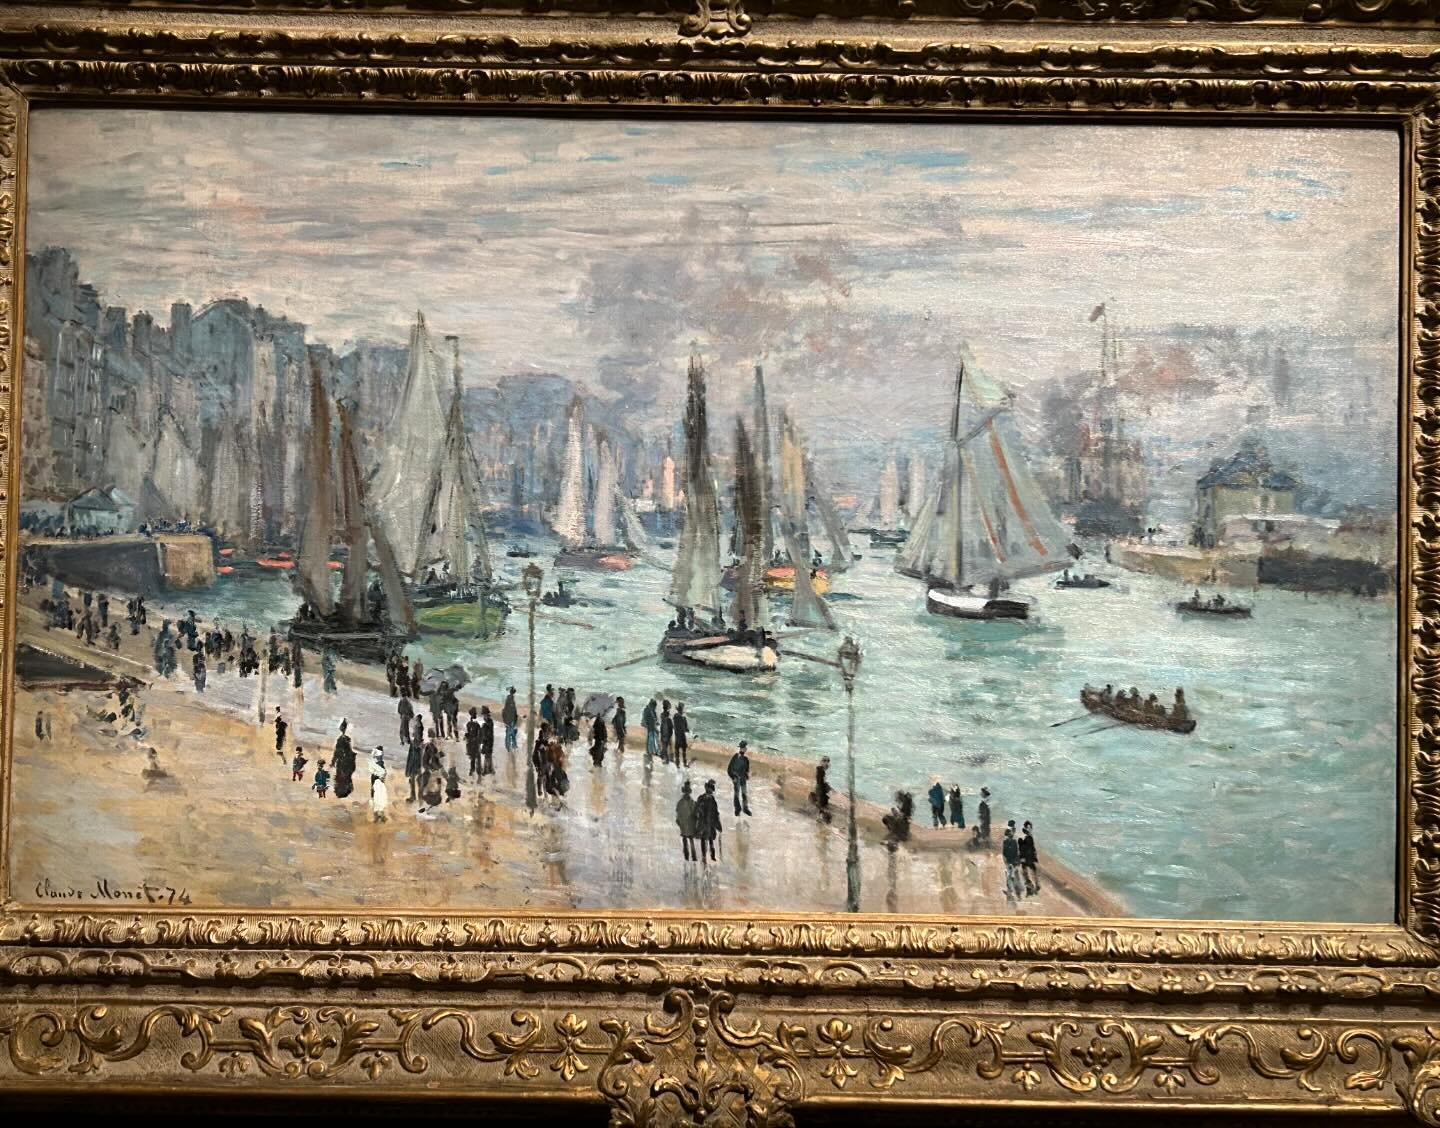 A few of my favorites from Paris 1874/Inventer l&rsquo;Impressionisme at #museedorsay; a revelatory exhibition! #monet #salon #impressionism #1874 #paris #150years